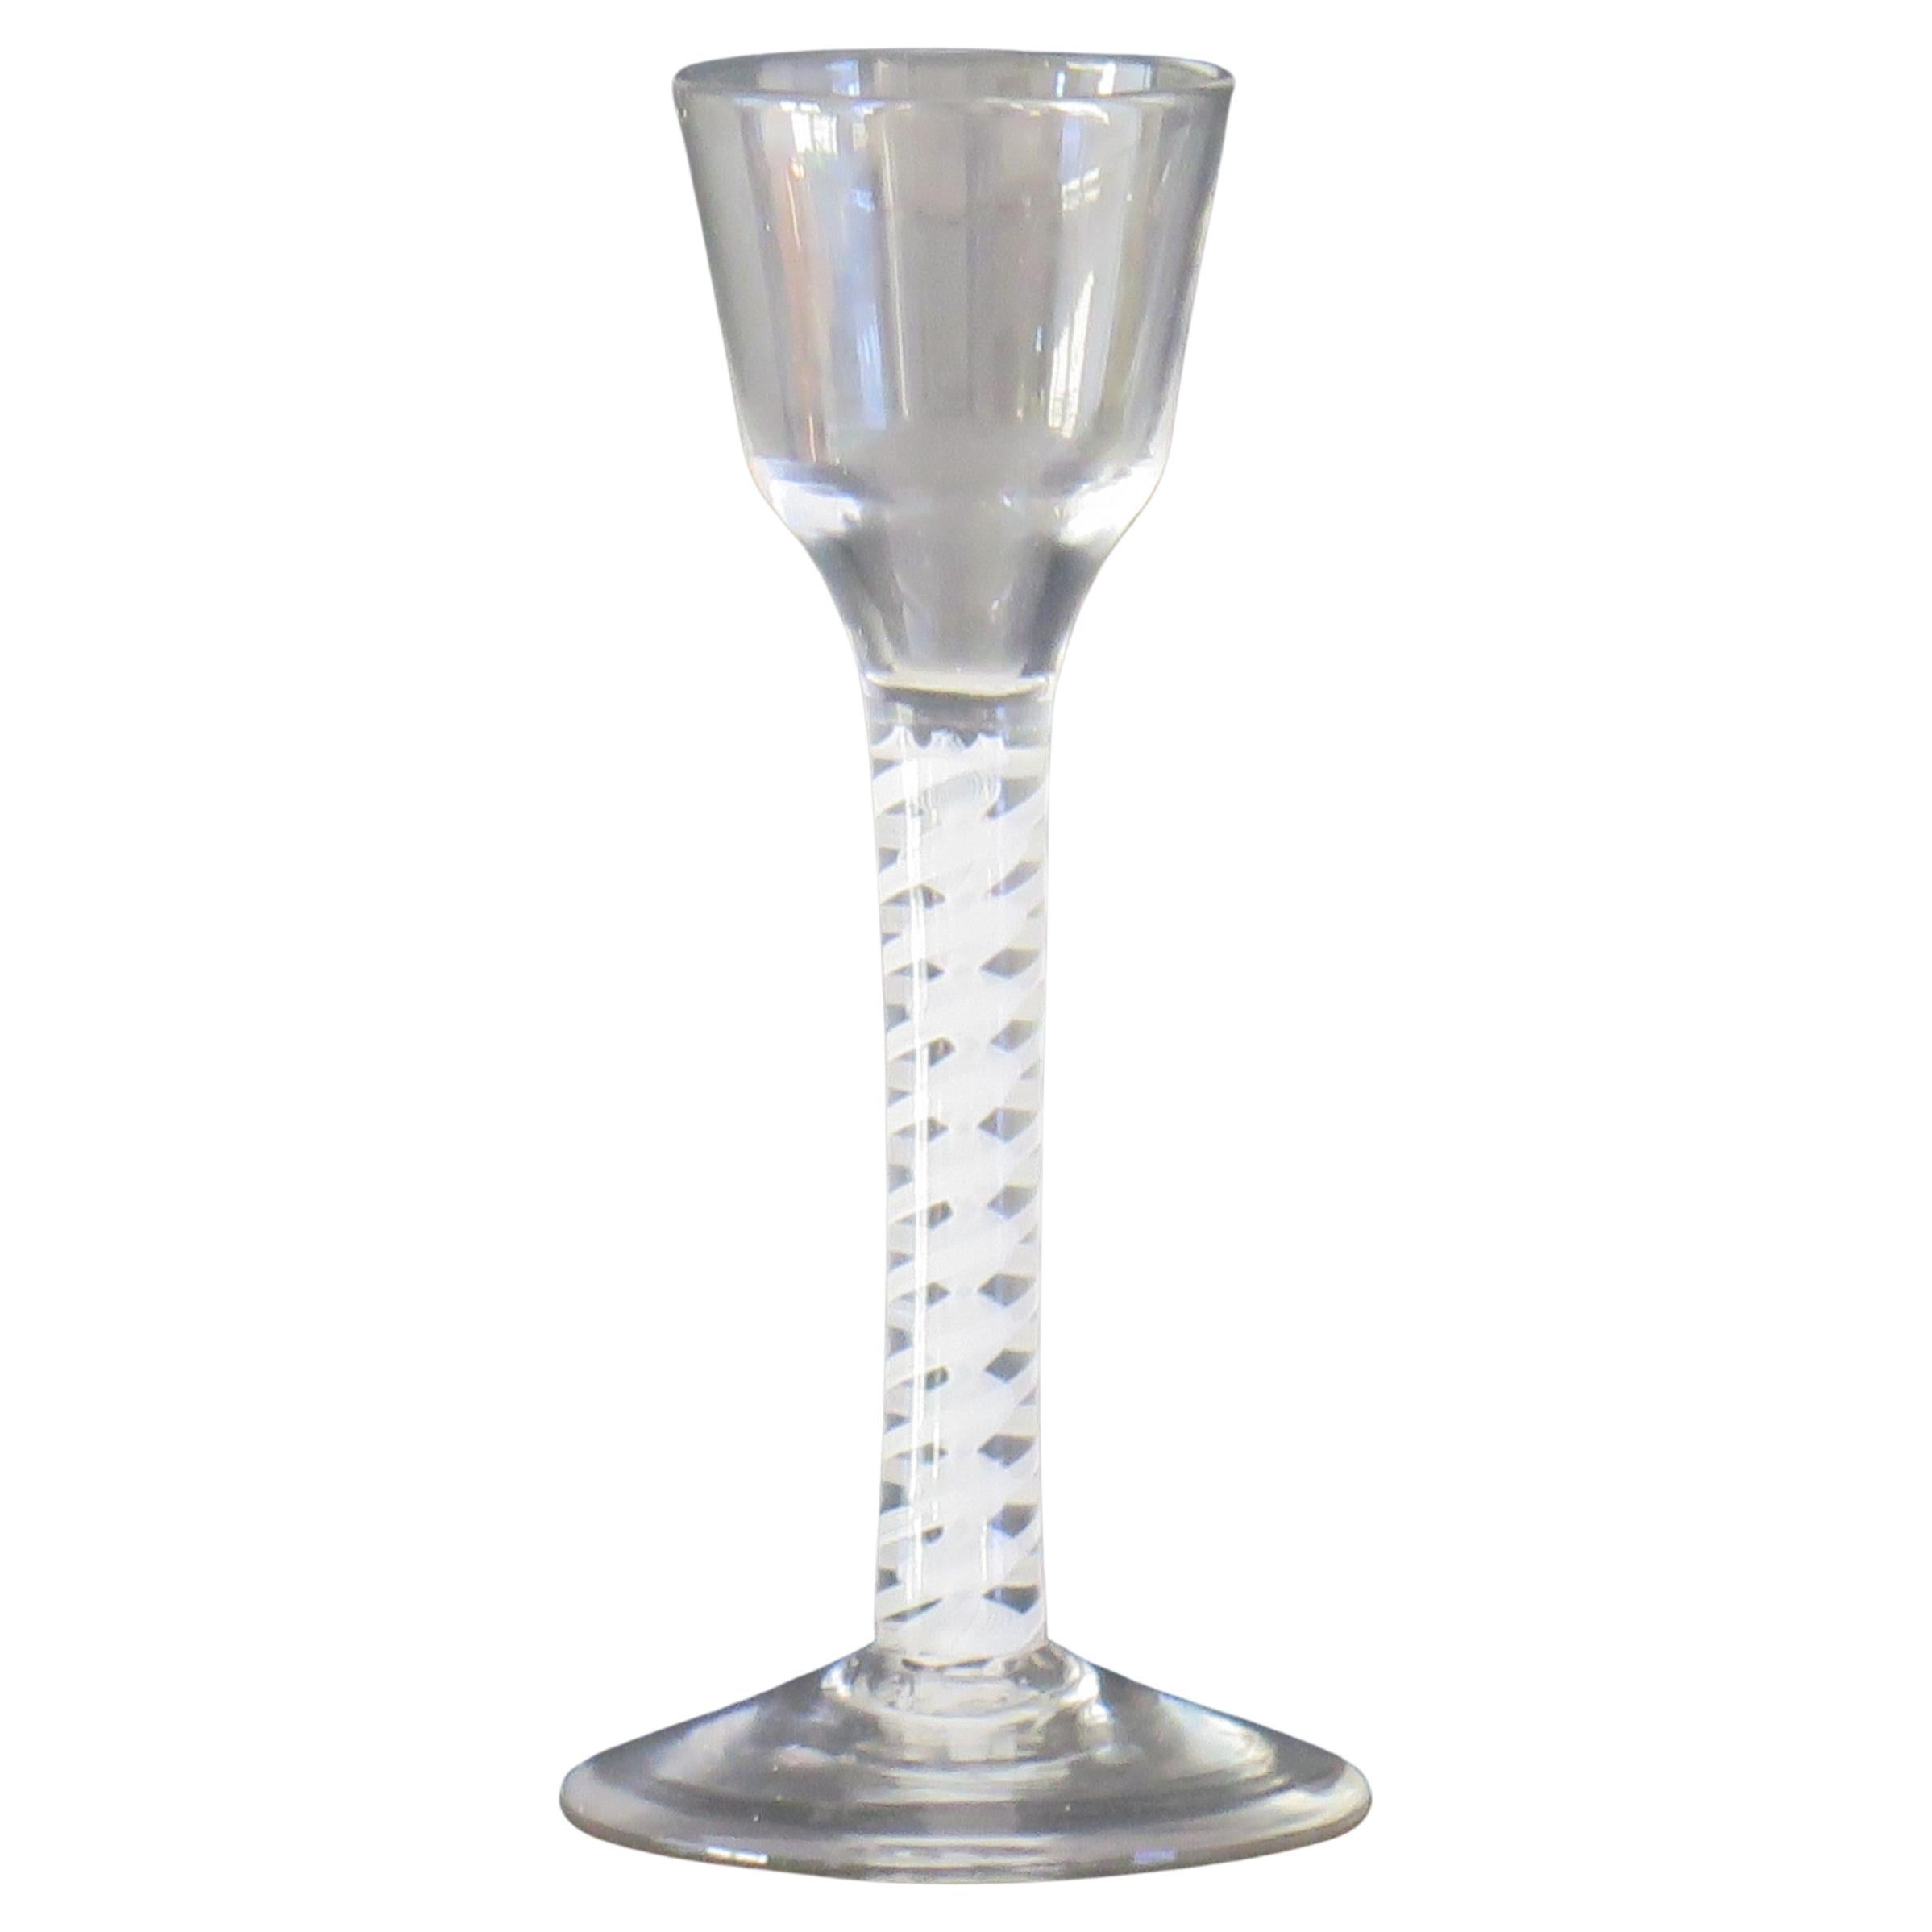 This is a good hand blown, English, mid-Georgian, Cordial drinking glass with a double series opaque twist (DSOT) stem, dating from the middle of the 18th century, circa 1765.

These glasses are very collectable, with cordial glasses being rarer